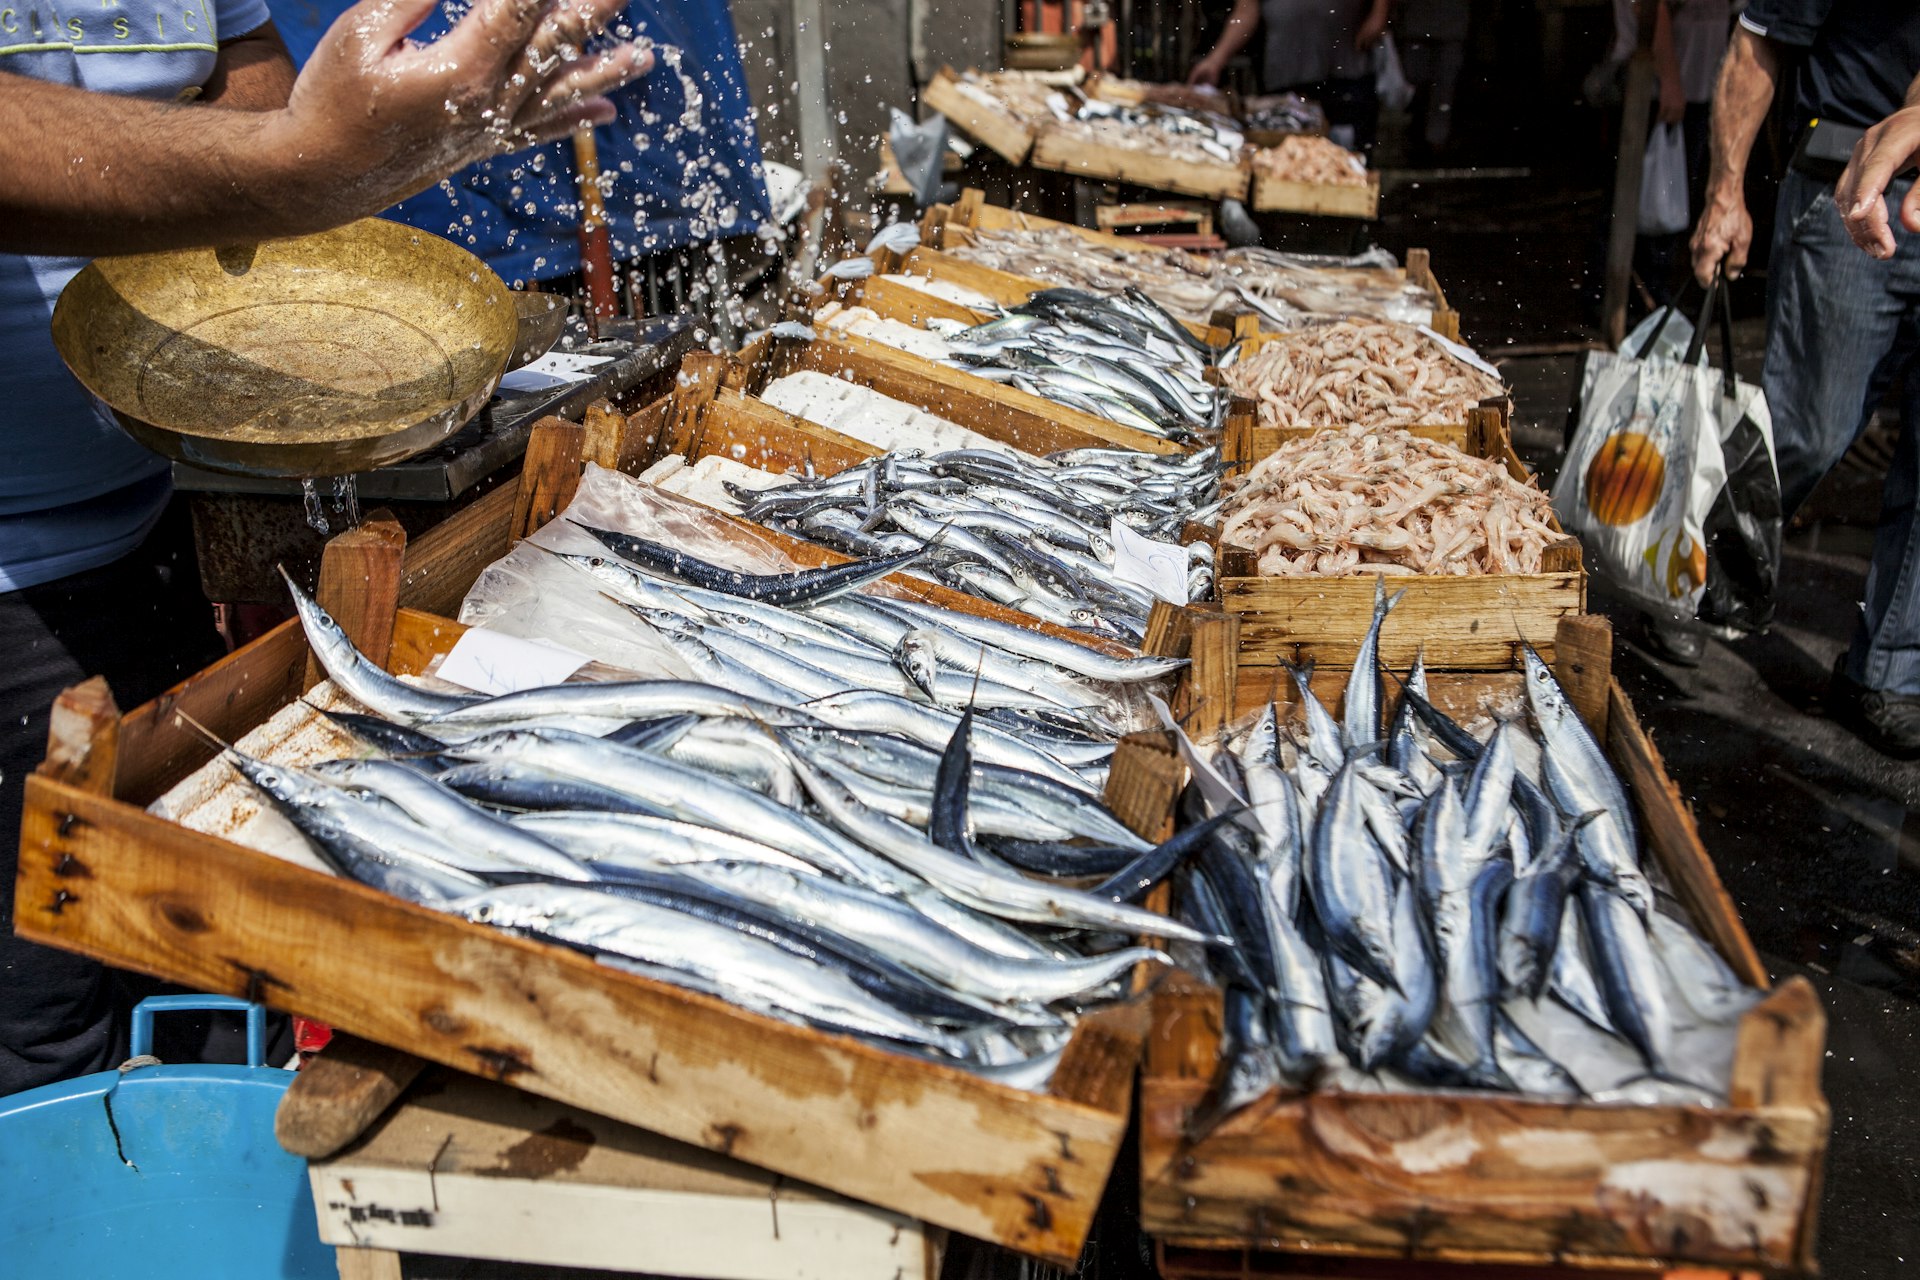 A fish stall at La Pescheria, the fish market in Catania, with wooden boxes filled with various types of freshly caught fish